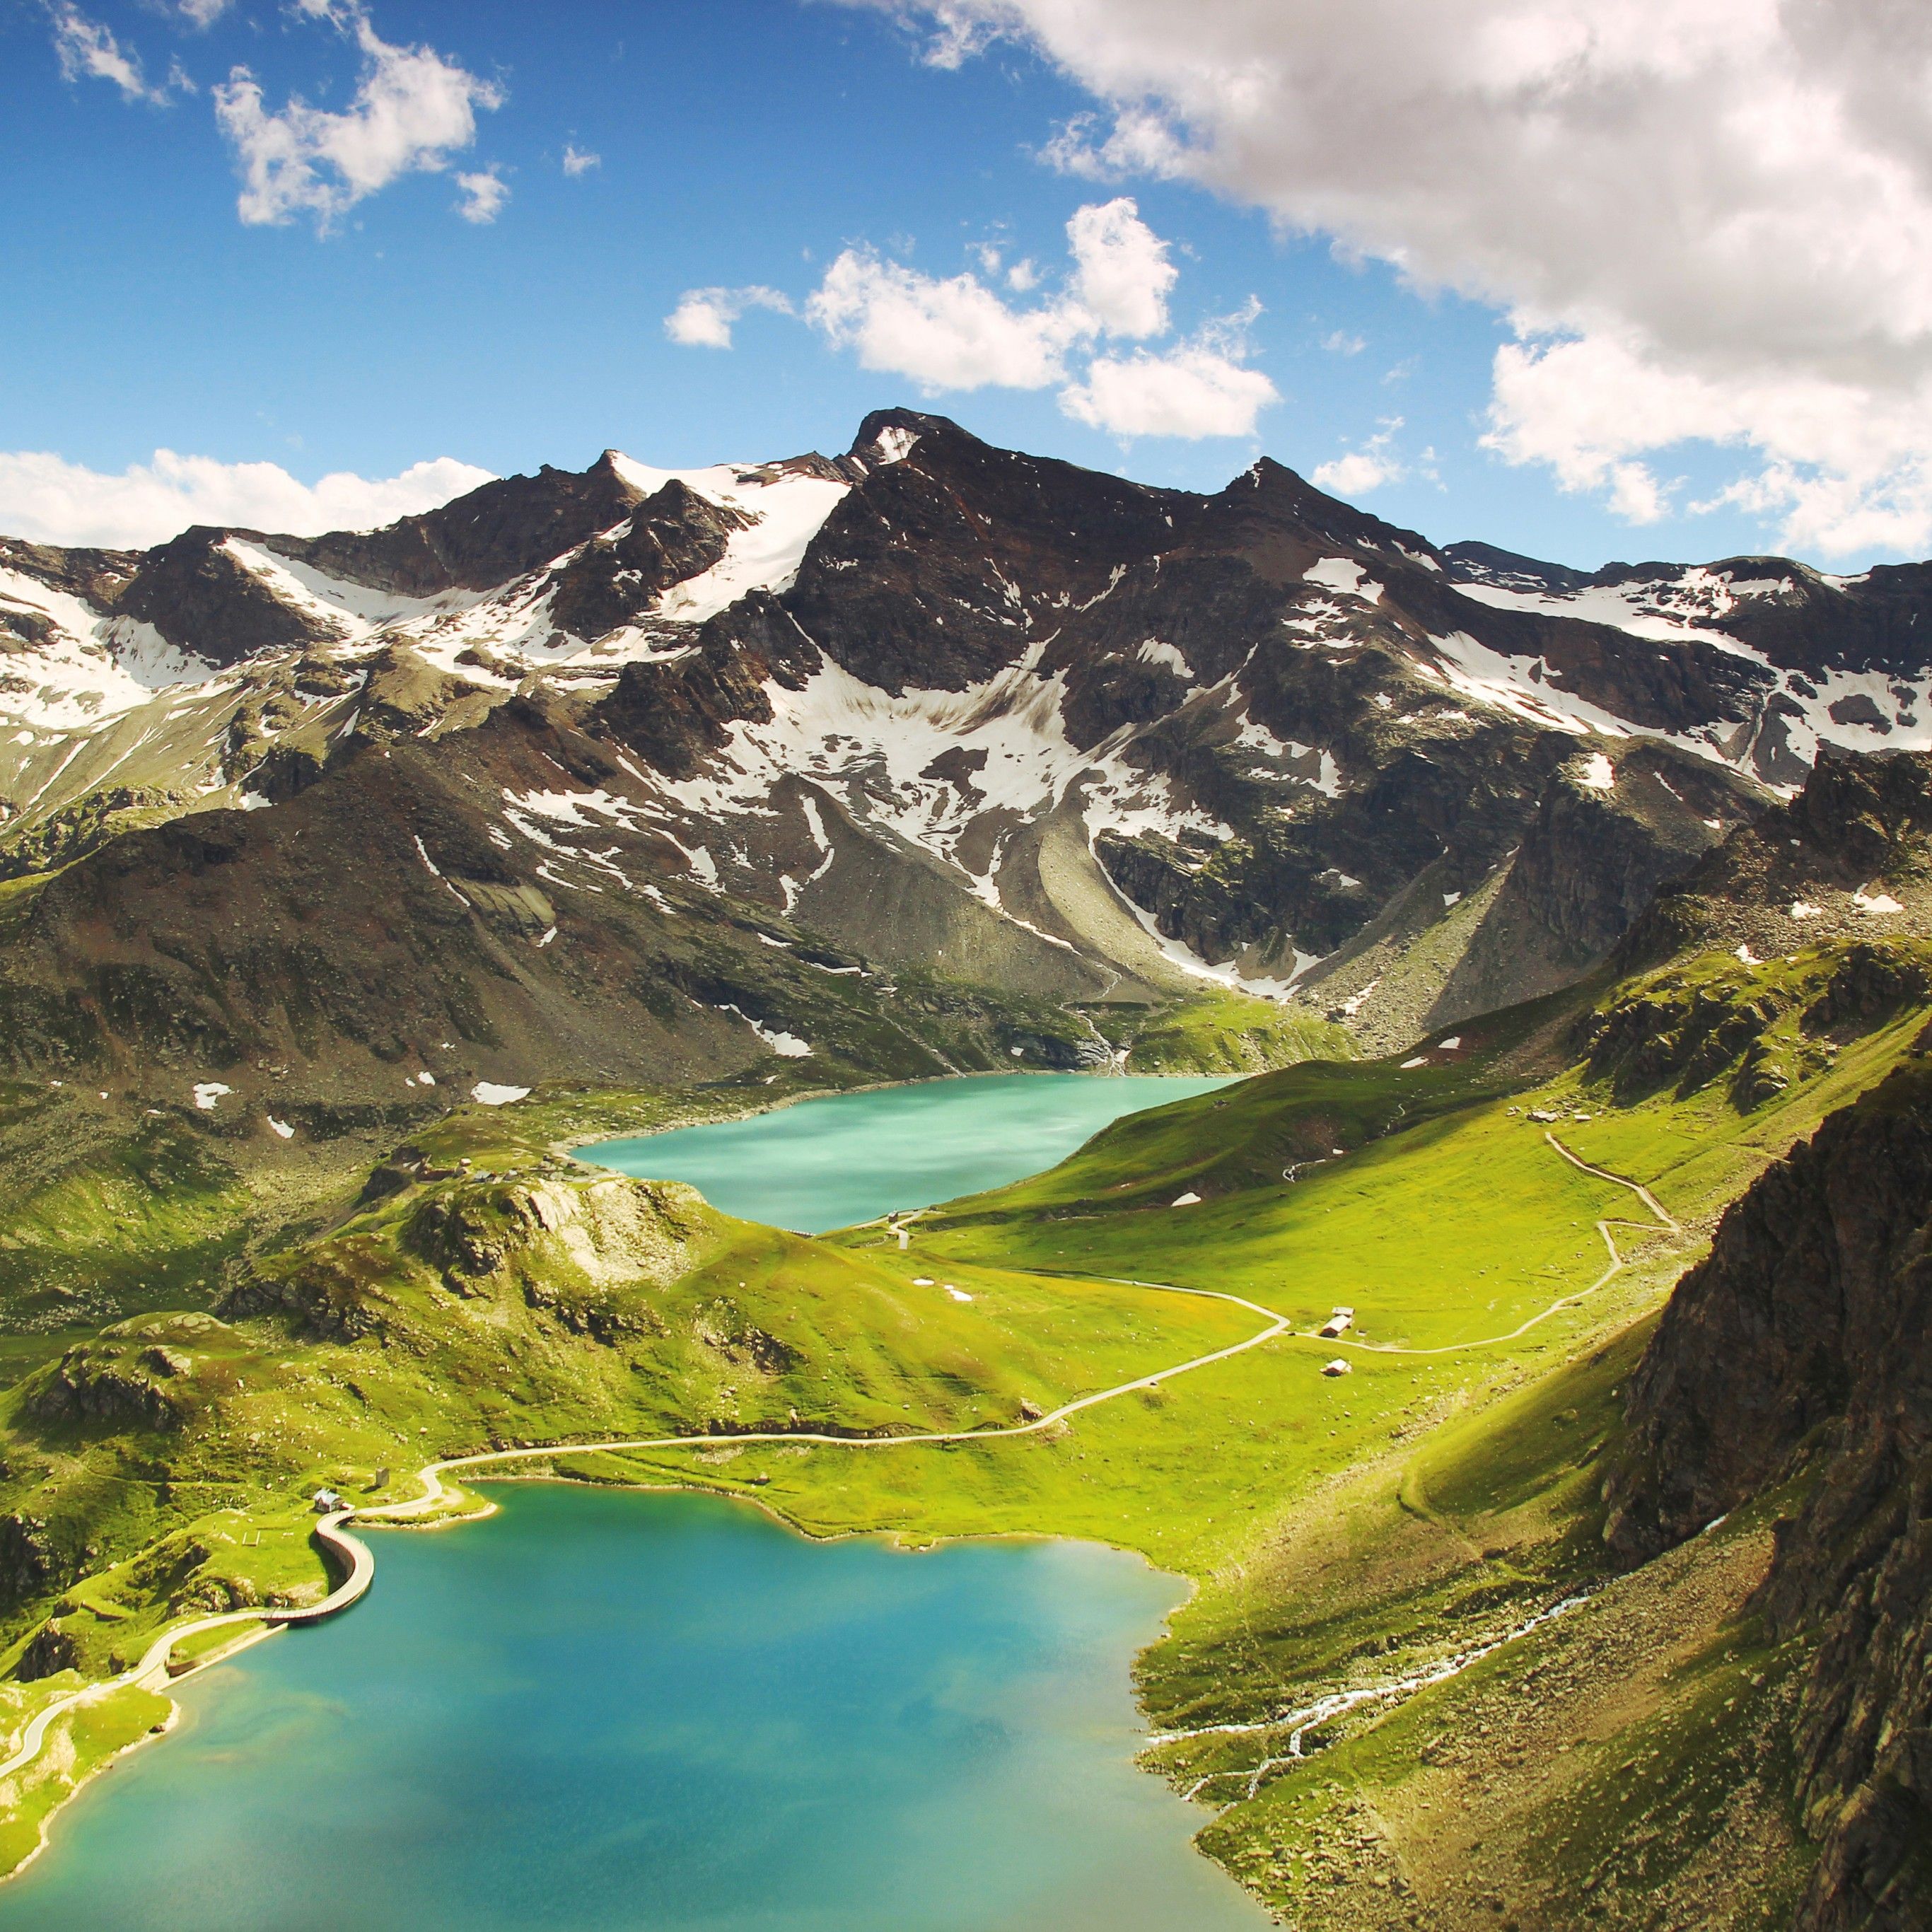 Ceresole Reale Wallpaper 4K, Summer, Mountains, Lake, Nature